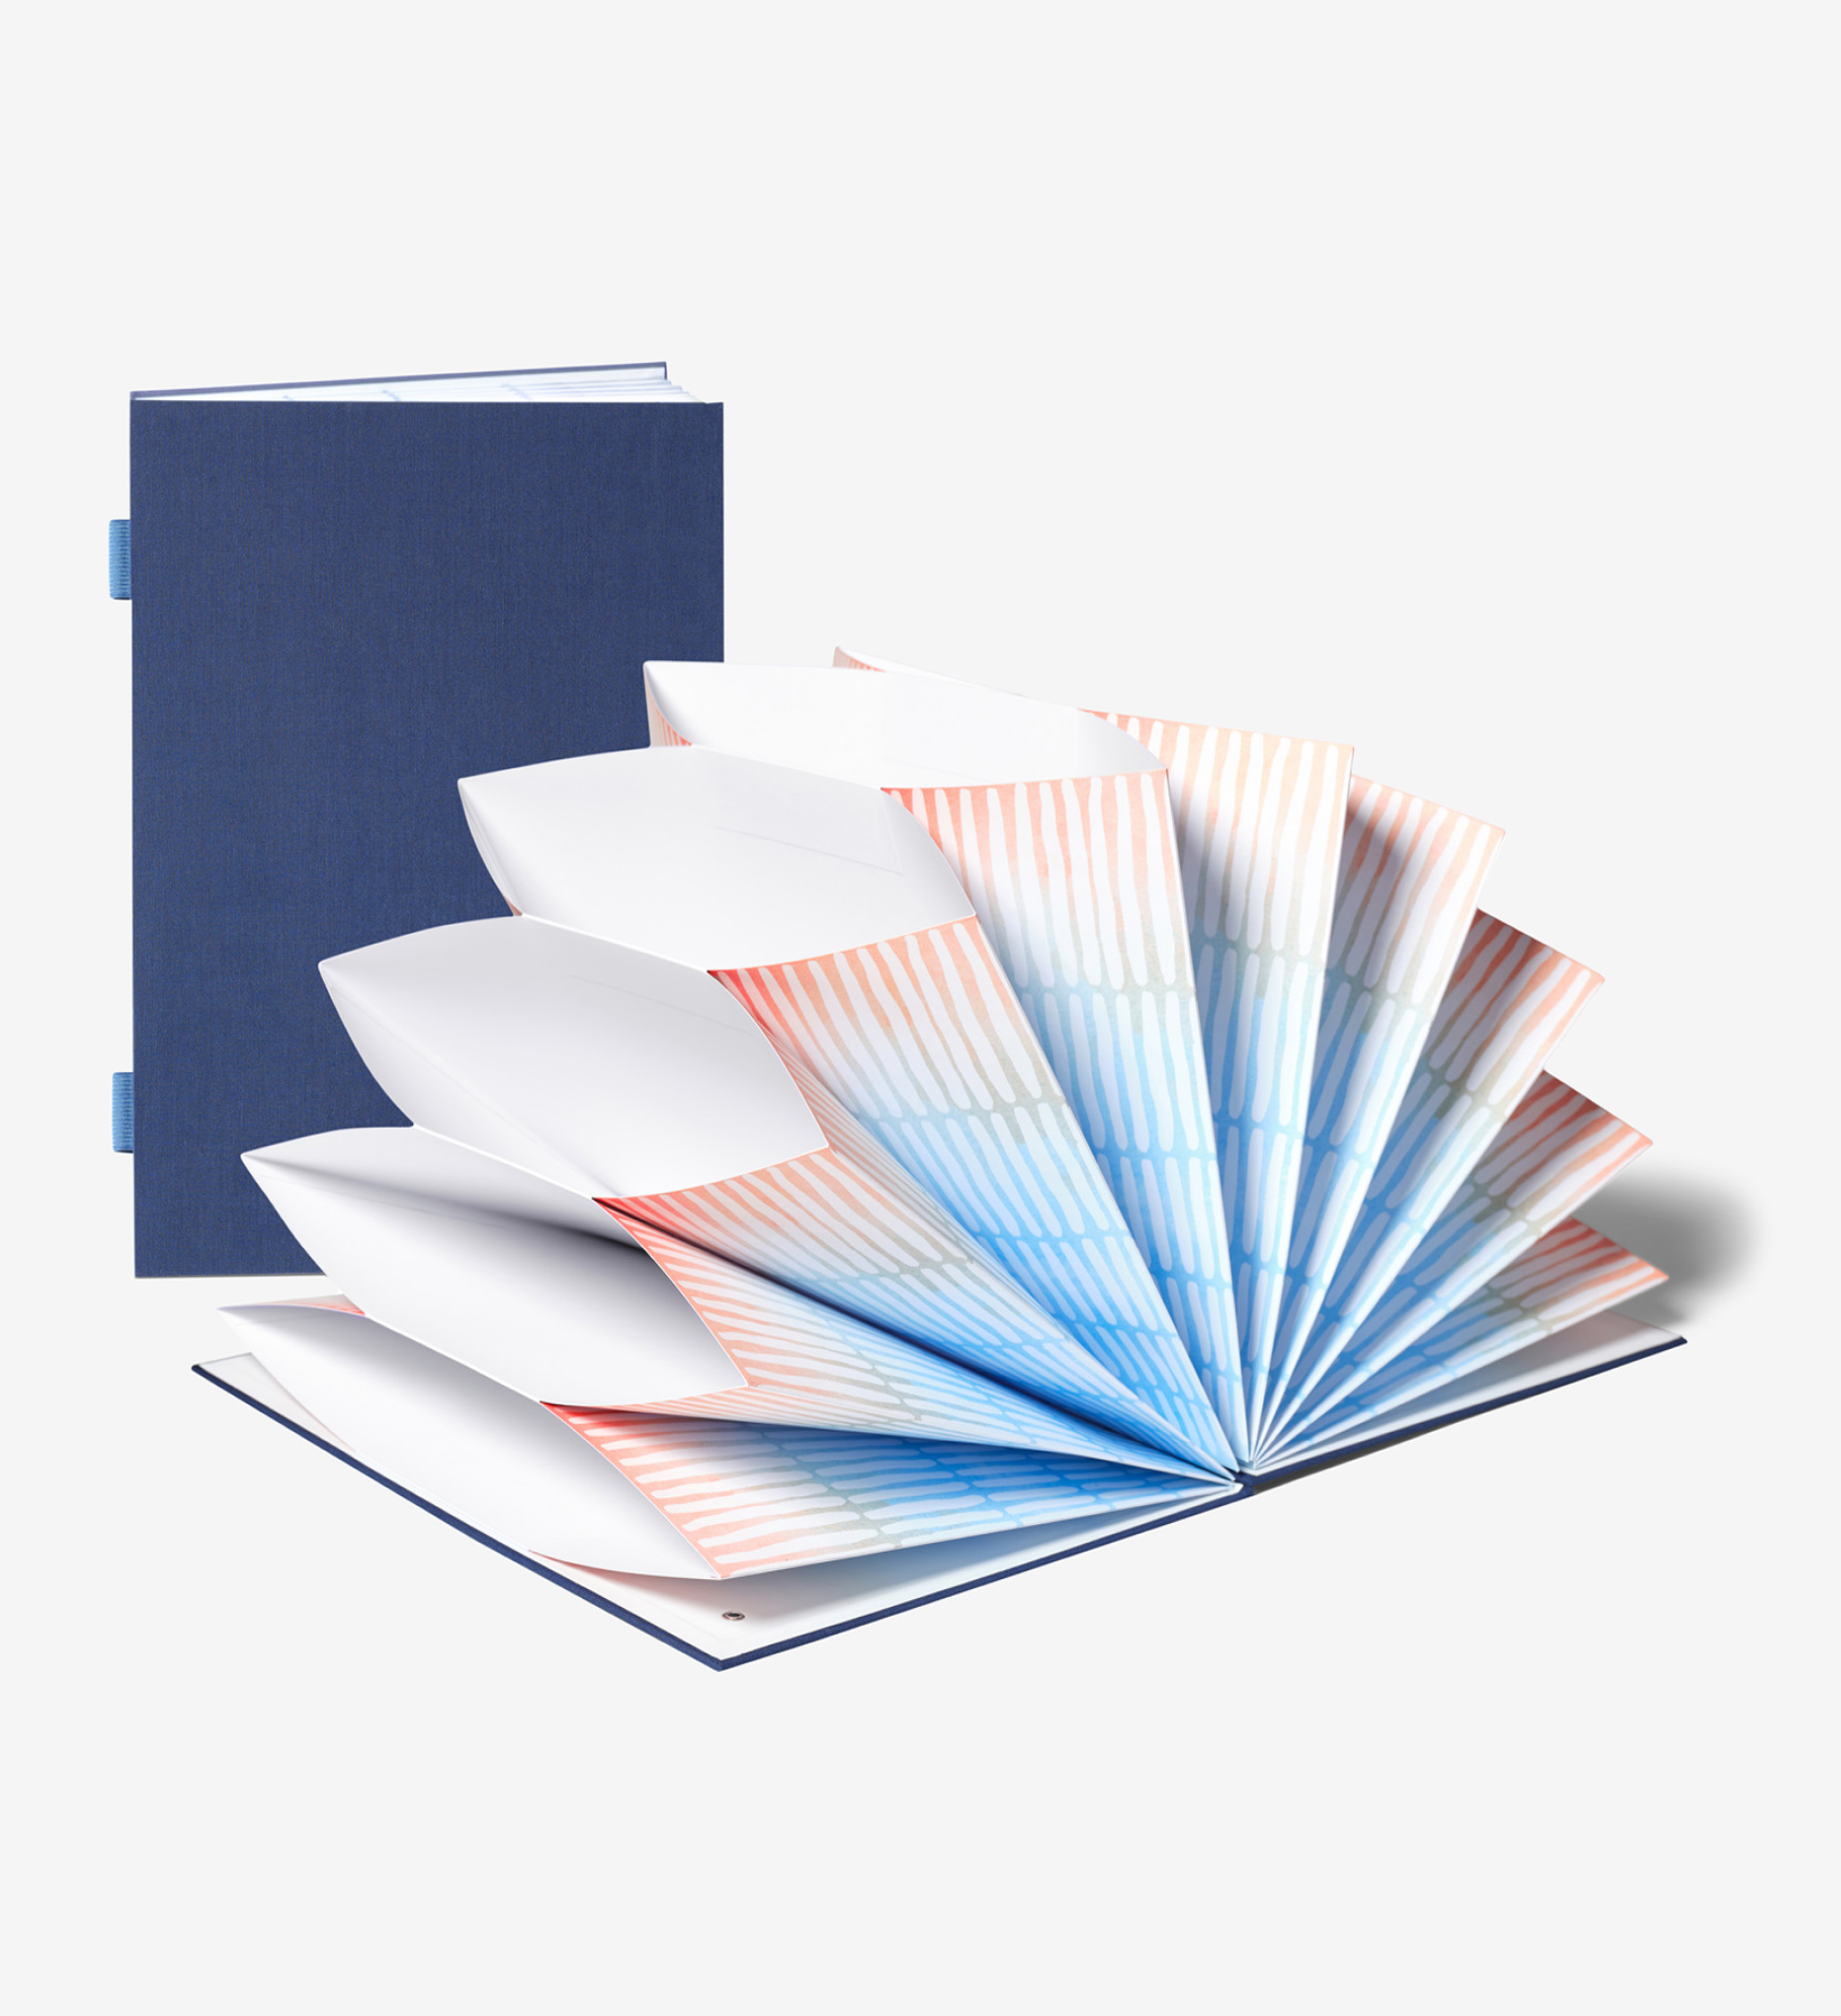 closed something blue, and open colorful fan folios.